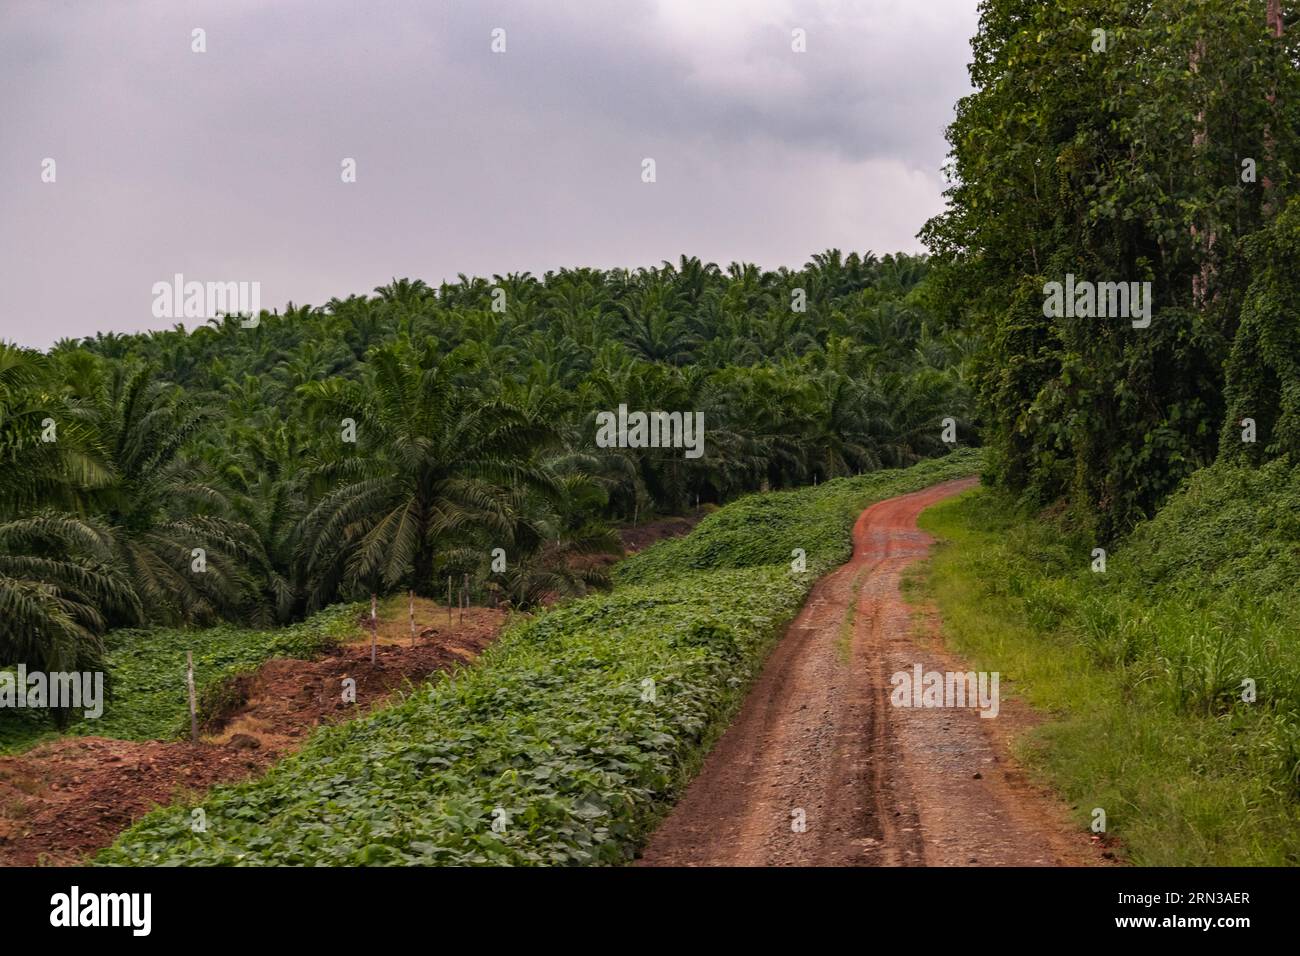 Amazing view of an oil palm plantation and the adjacent rainforest. Very meaningful image Stock Photo